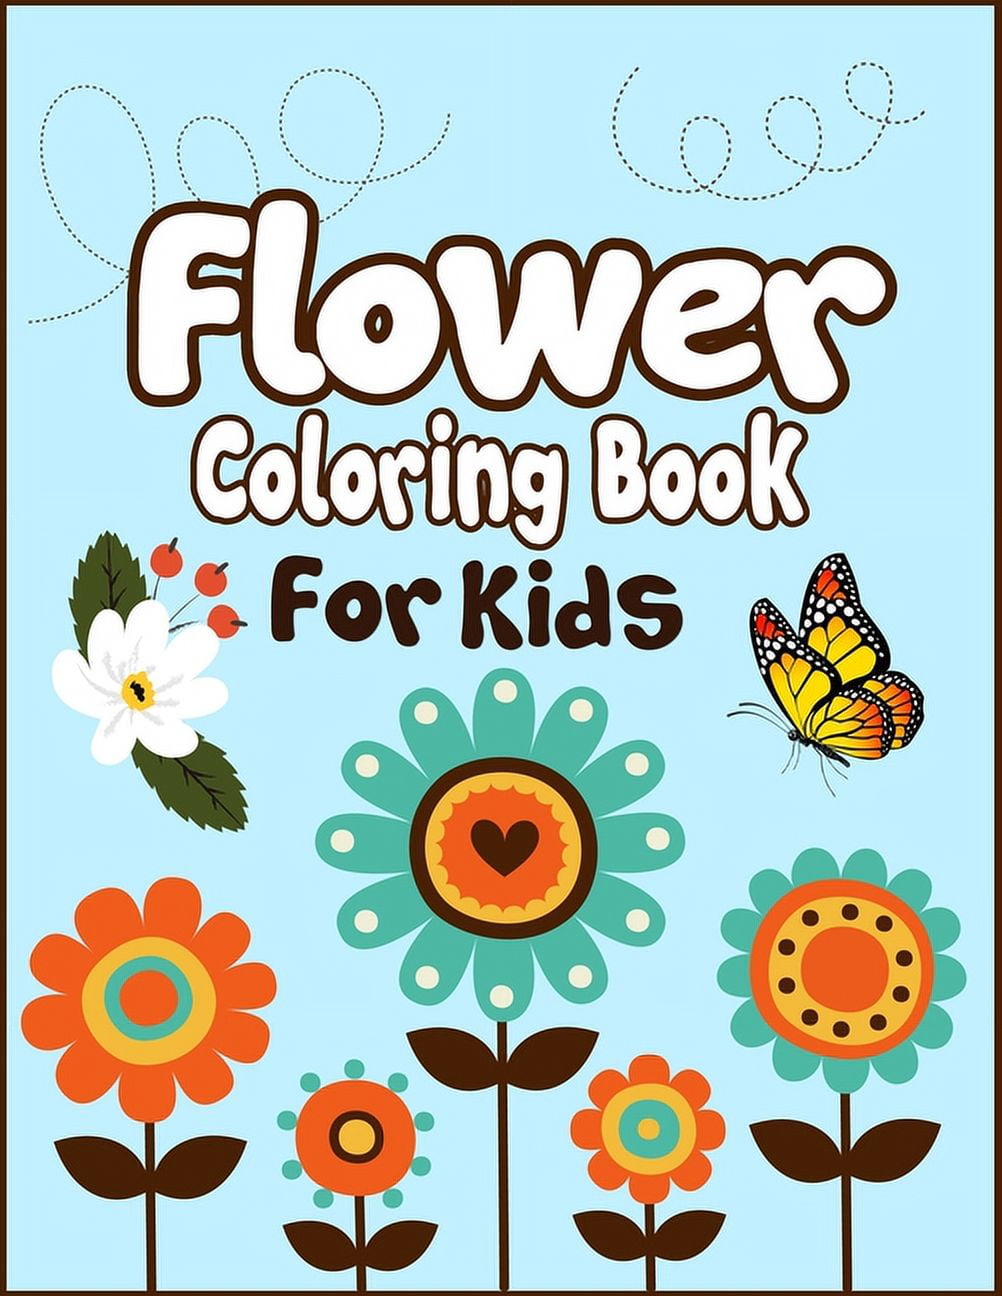 Easy Flowers Coloring Book For Toddlers and Kids: Over 50 Big & Simple  Coloring Pages for Beginners, Children, and Preschoolers